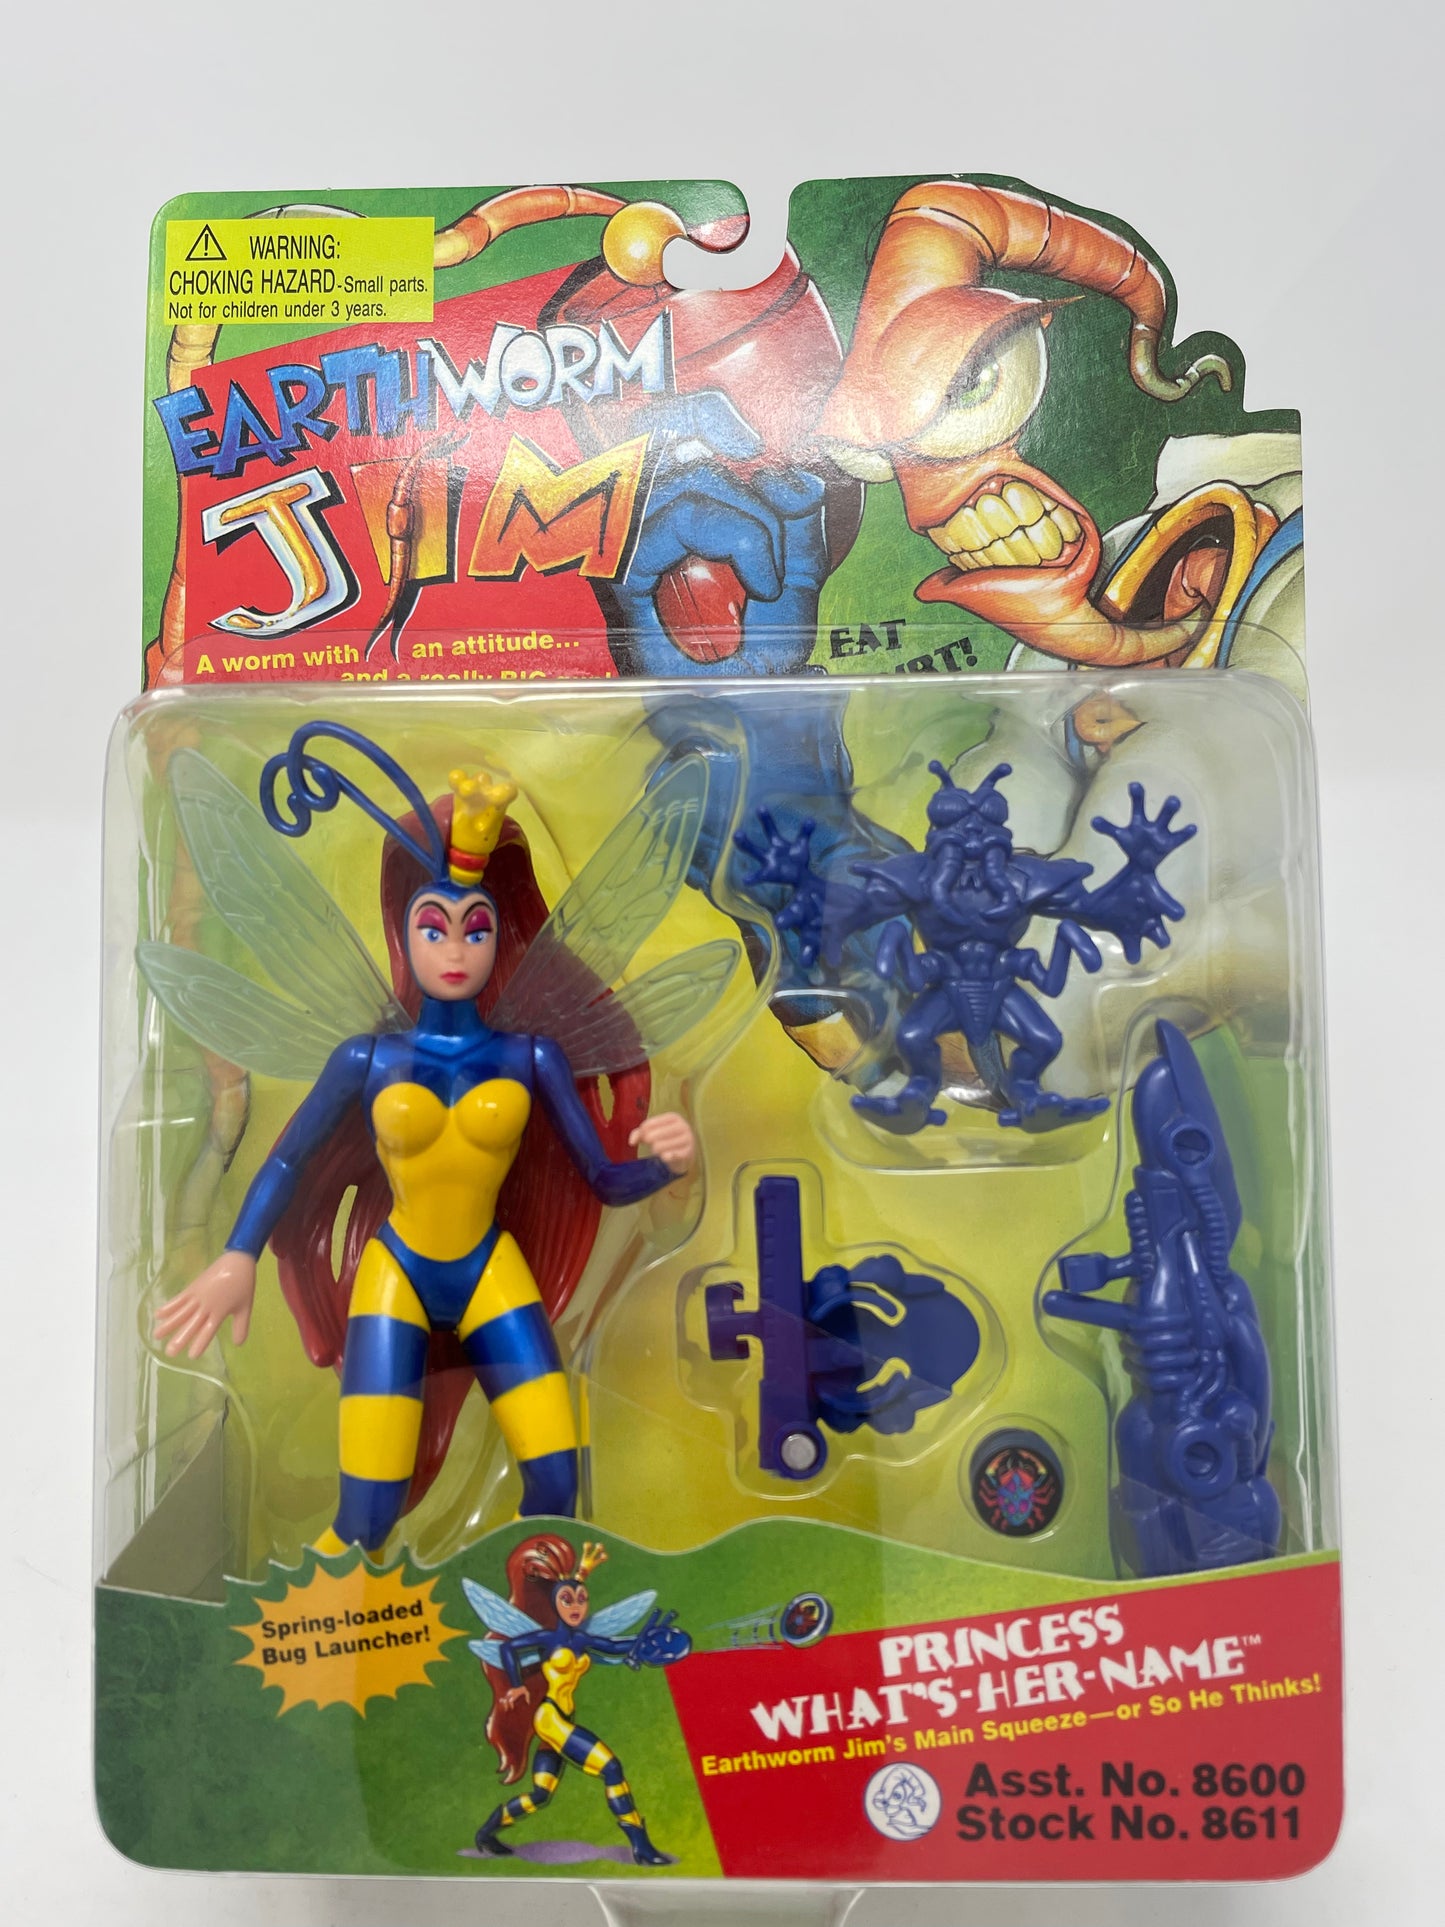 EARTHWORM JIM - PRINCESS WHAT'S HER NAME - 1994 PLAYMATES TOYS